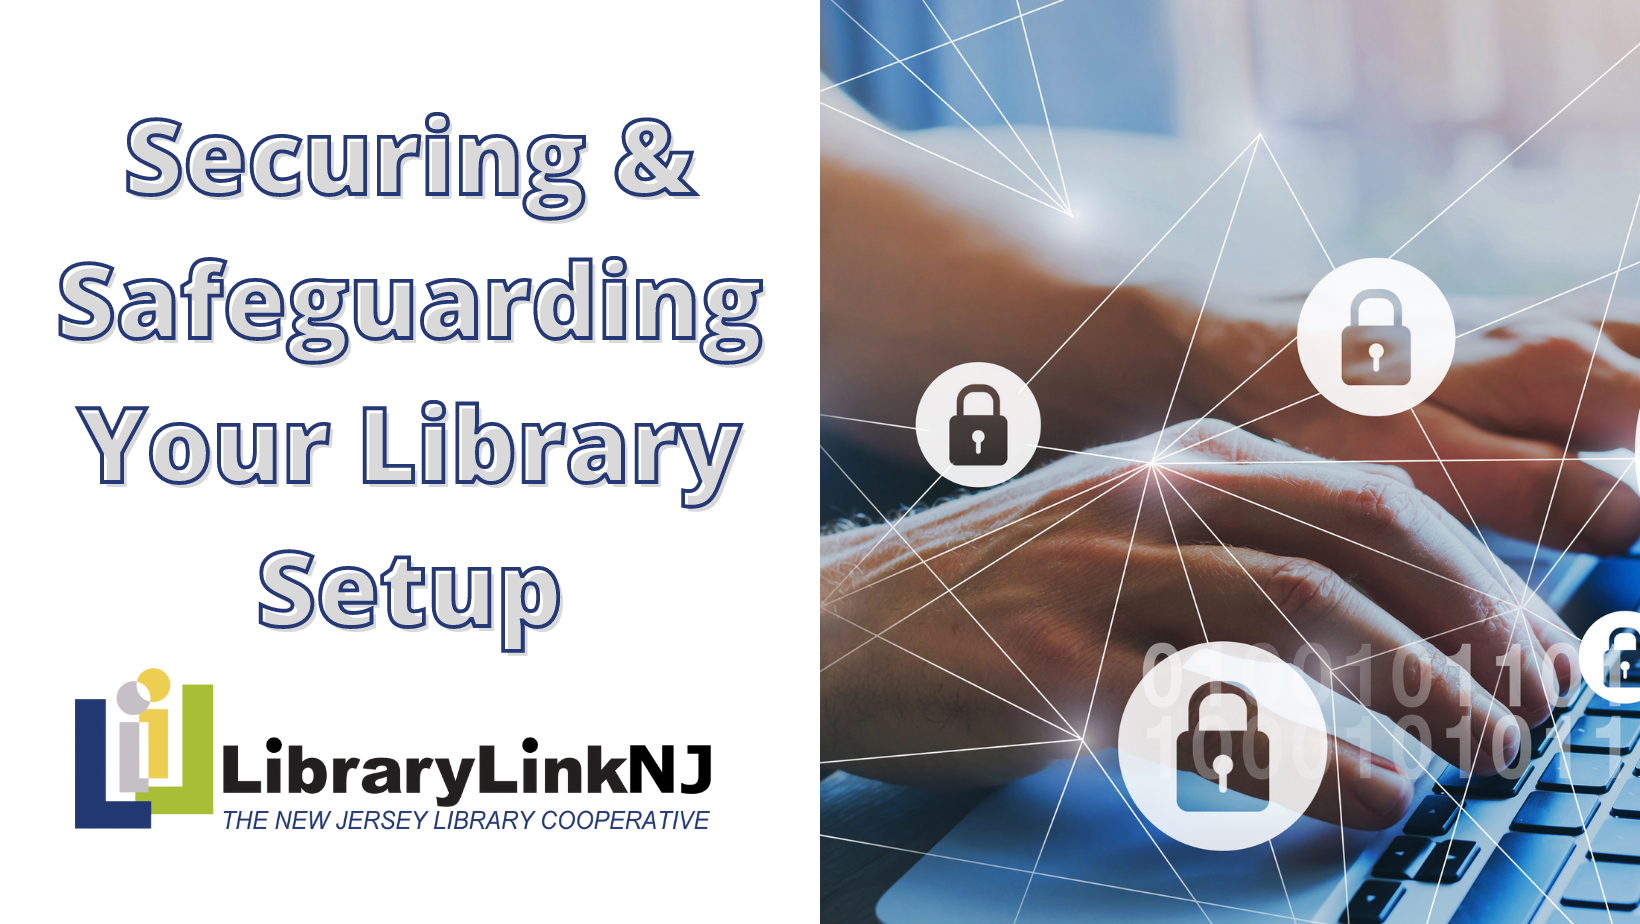 Securing and Safeguarding Your Library Setup